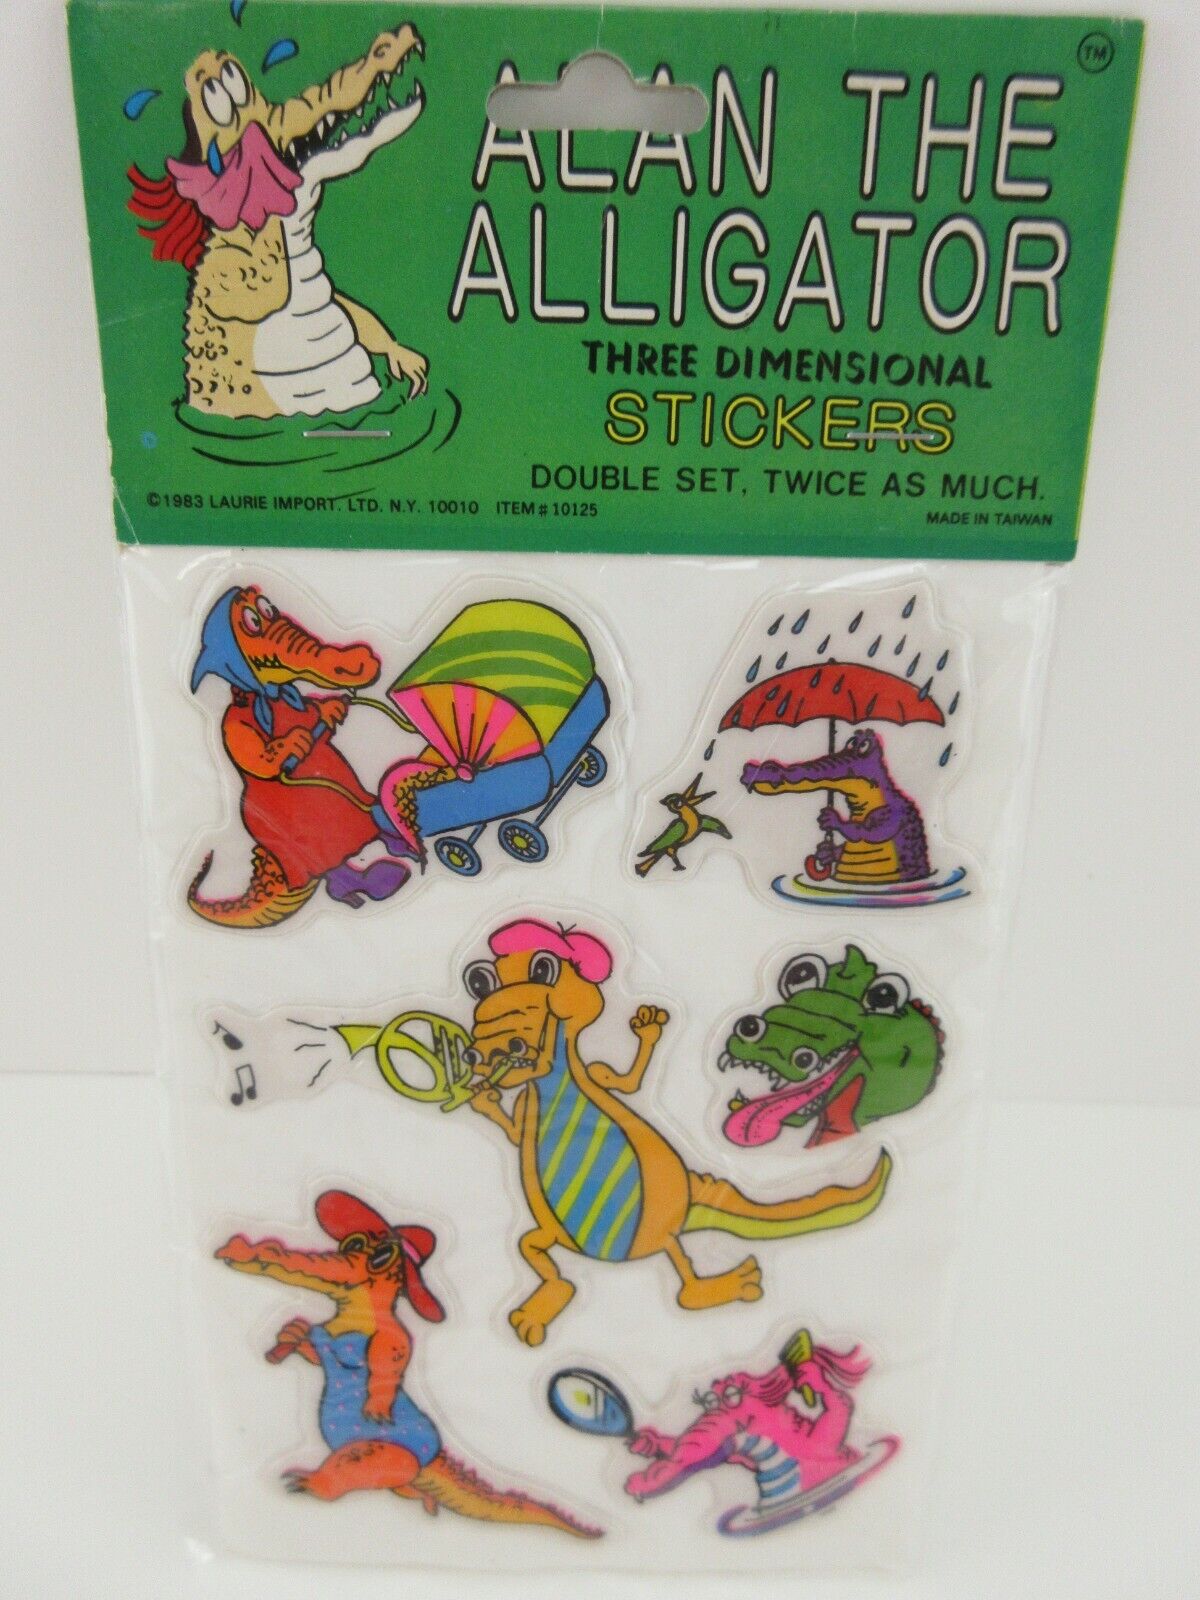 Vintage Alan The Alligator 3D Stickers 1983 NEW OLD STOCK